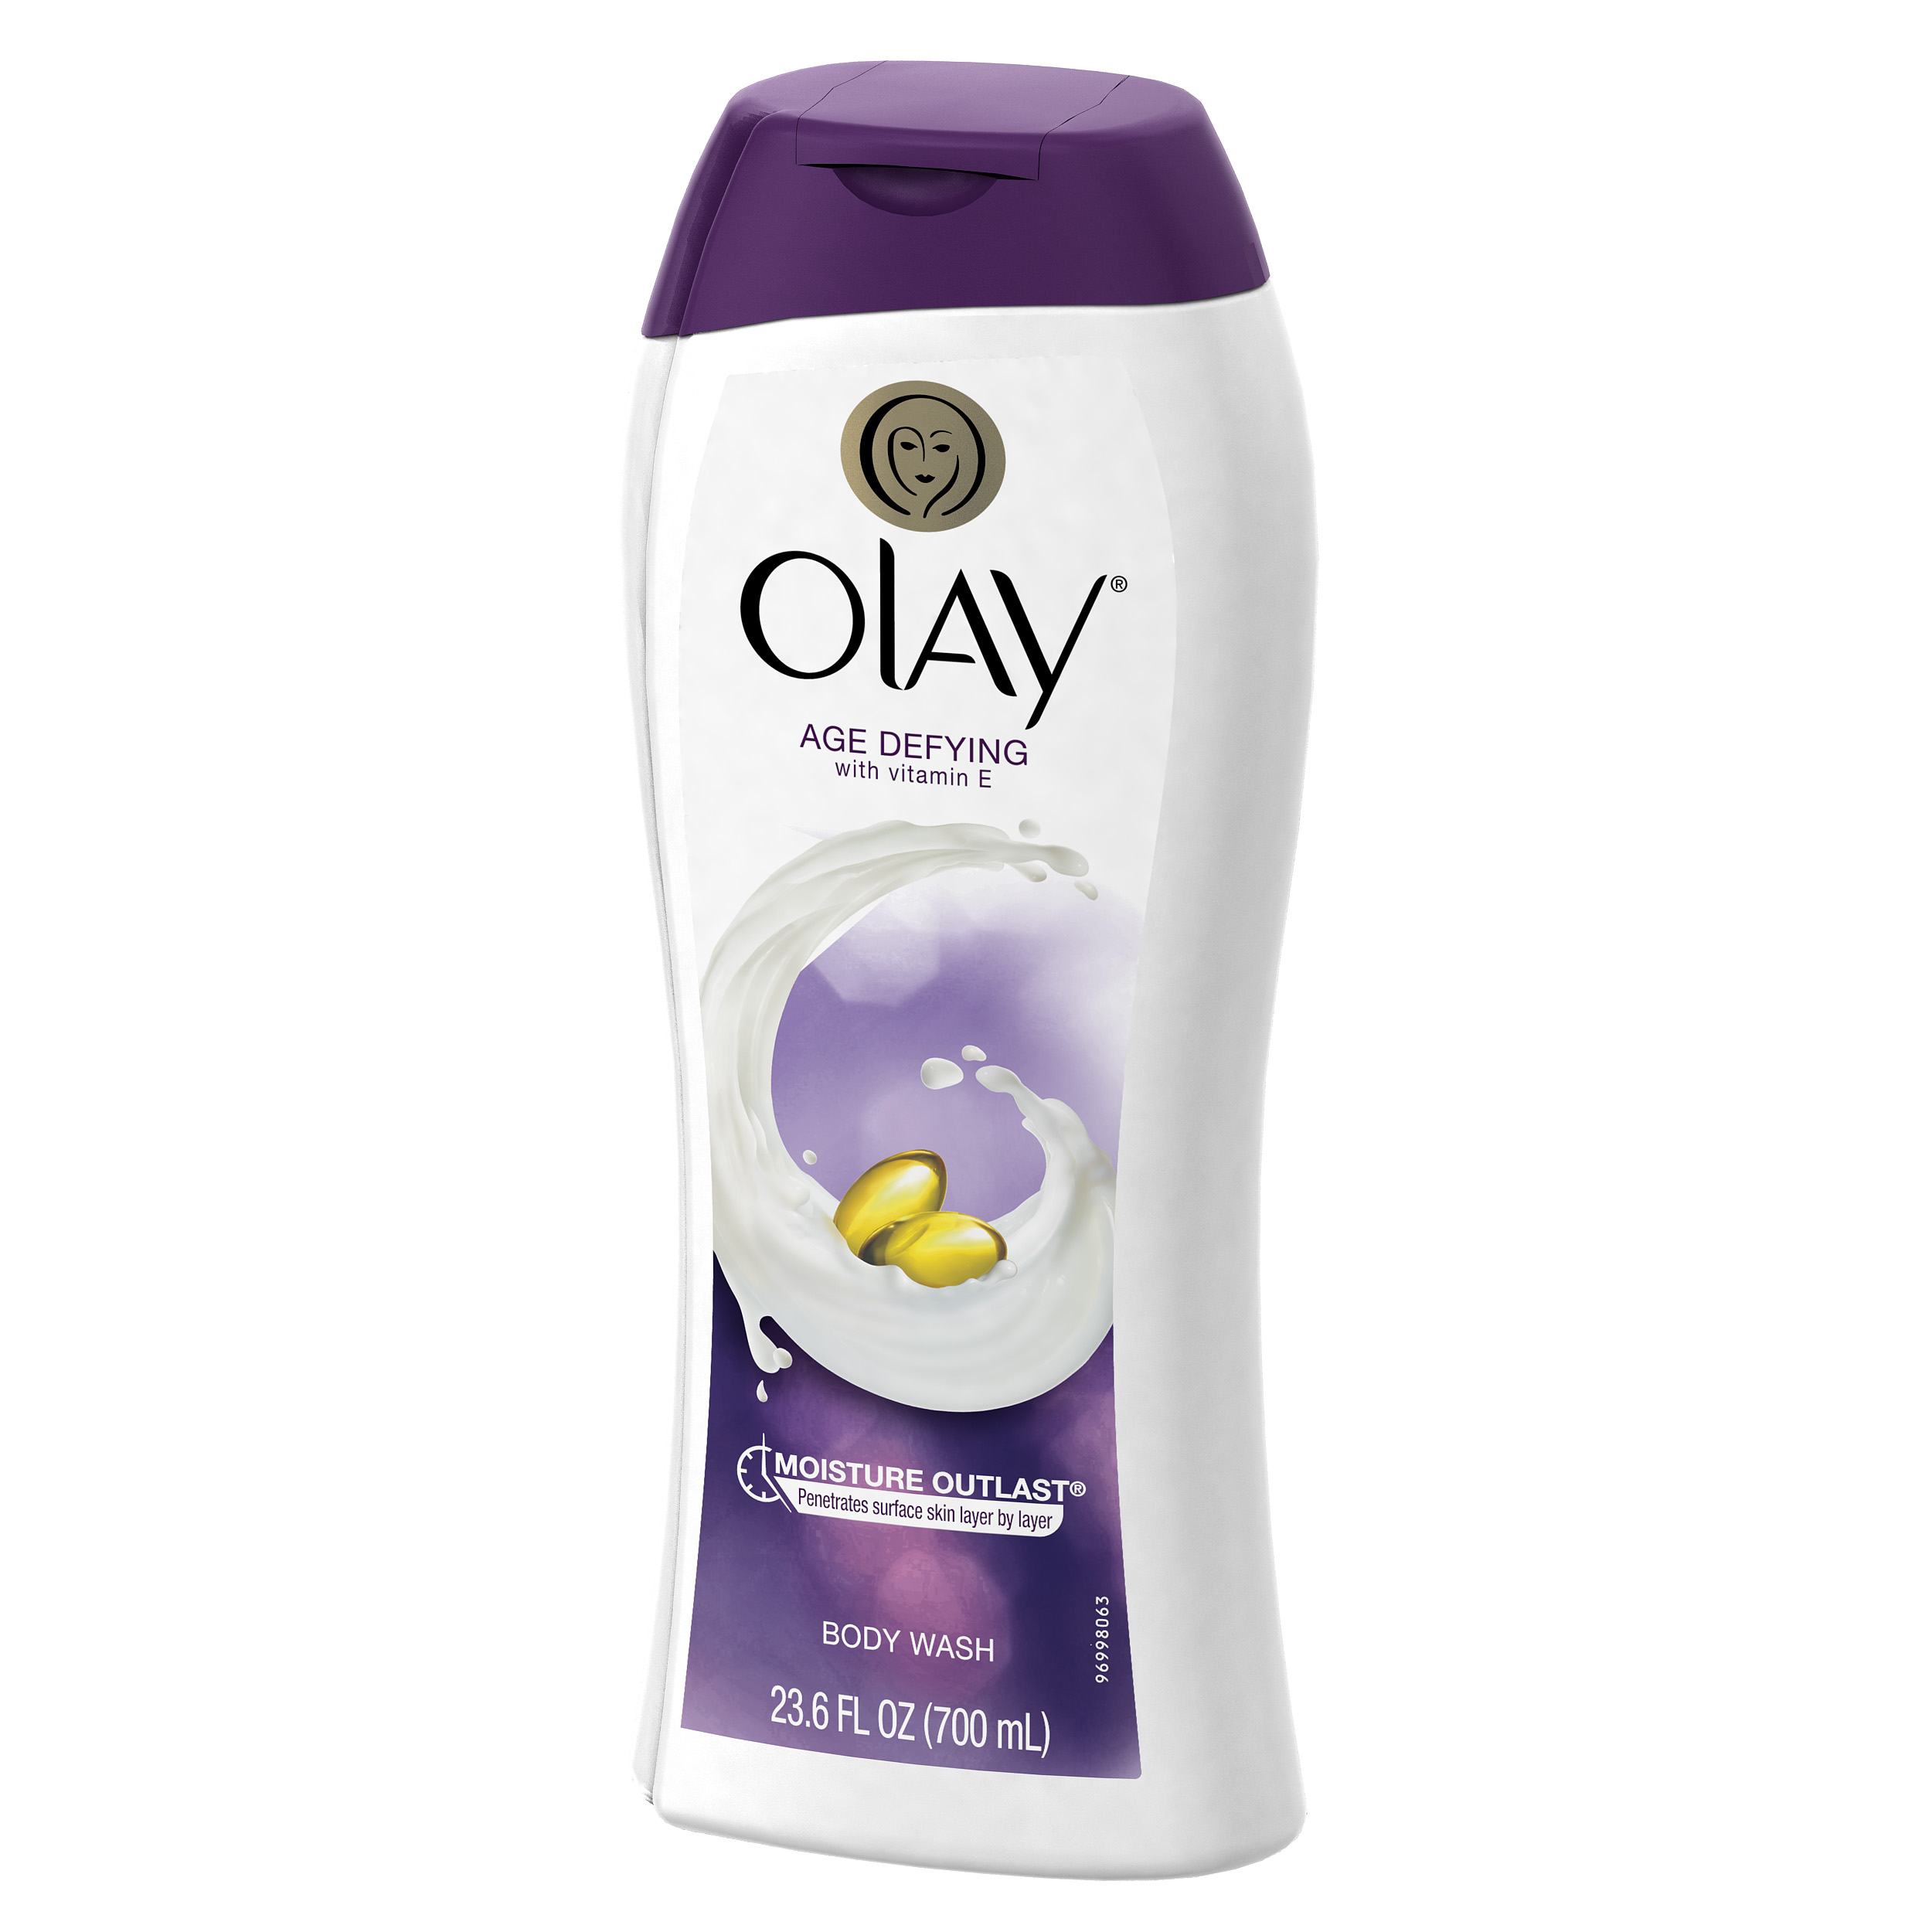 Olay Age Defying Body Wash With Vitamin E 23.6oz - image 2 of 5